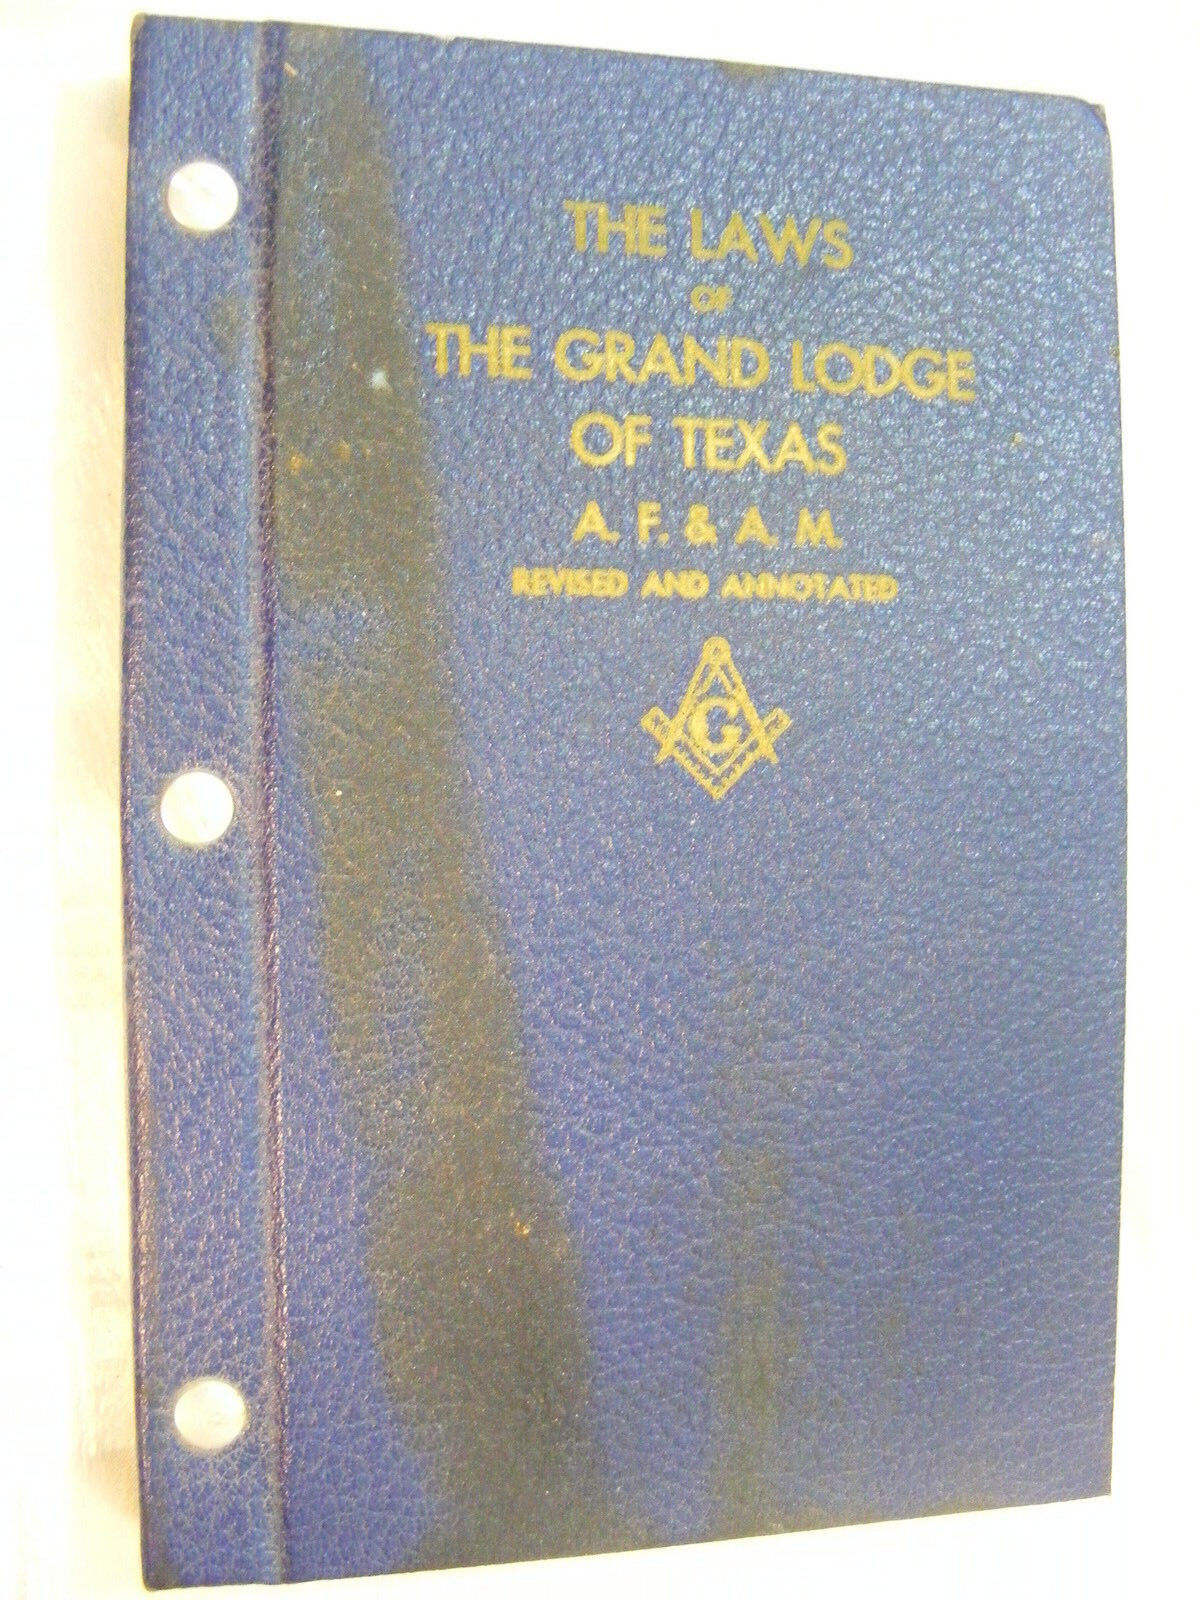 Vintage Mason The laws Of The Grand Lodge Of Texas A.F. & A.M. Revised Annotated